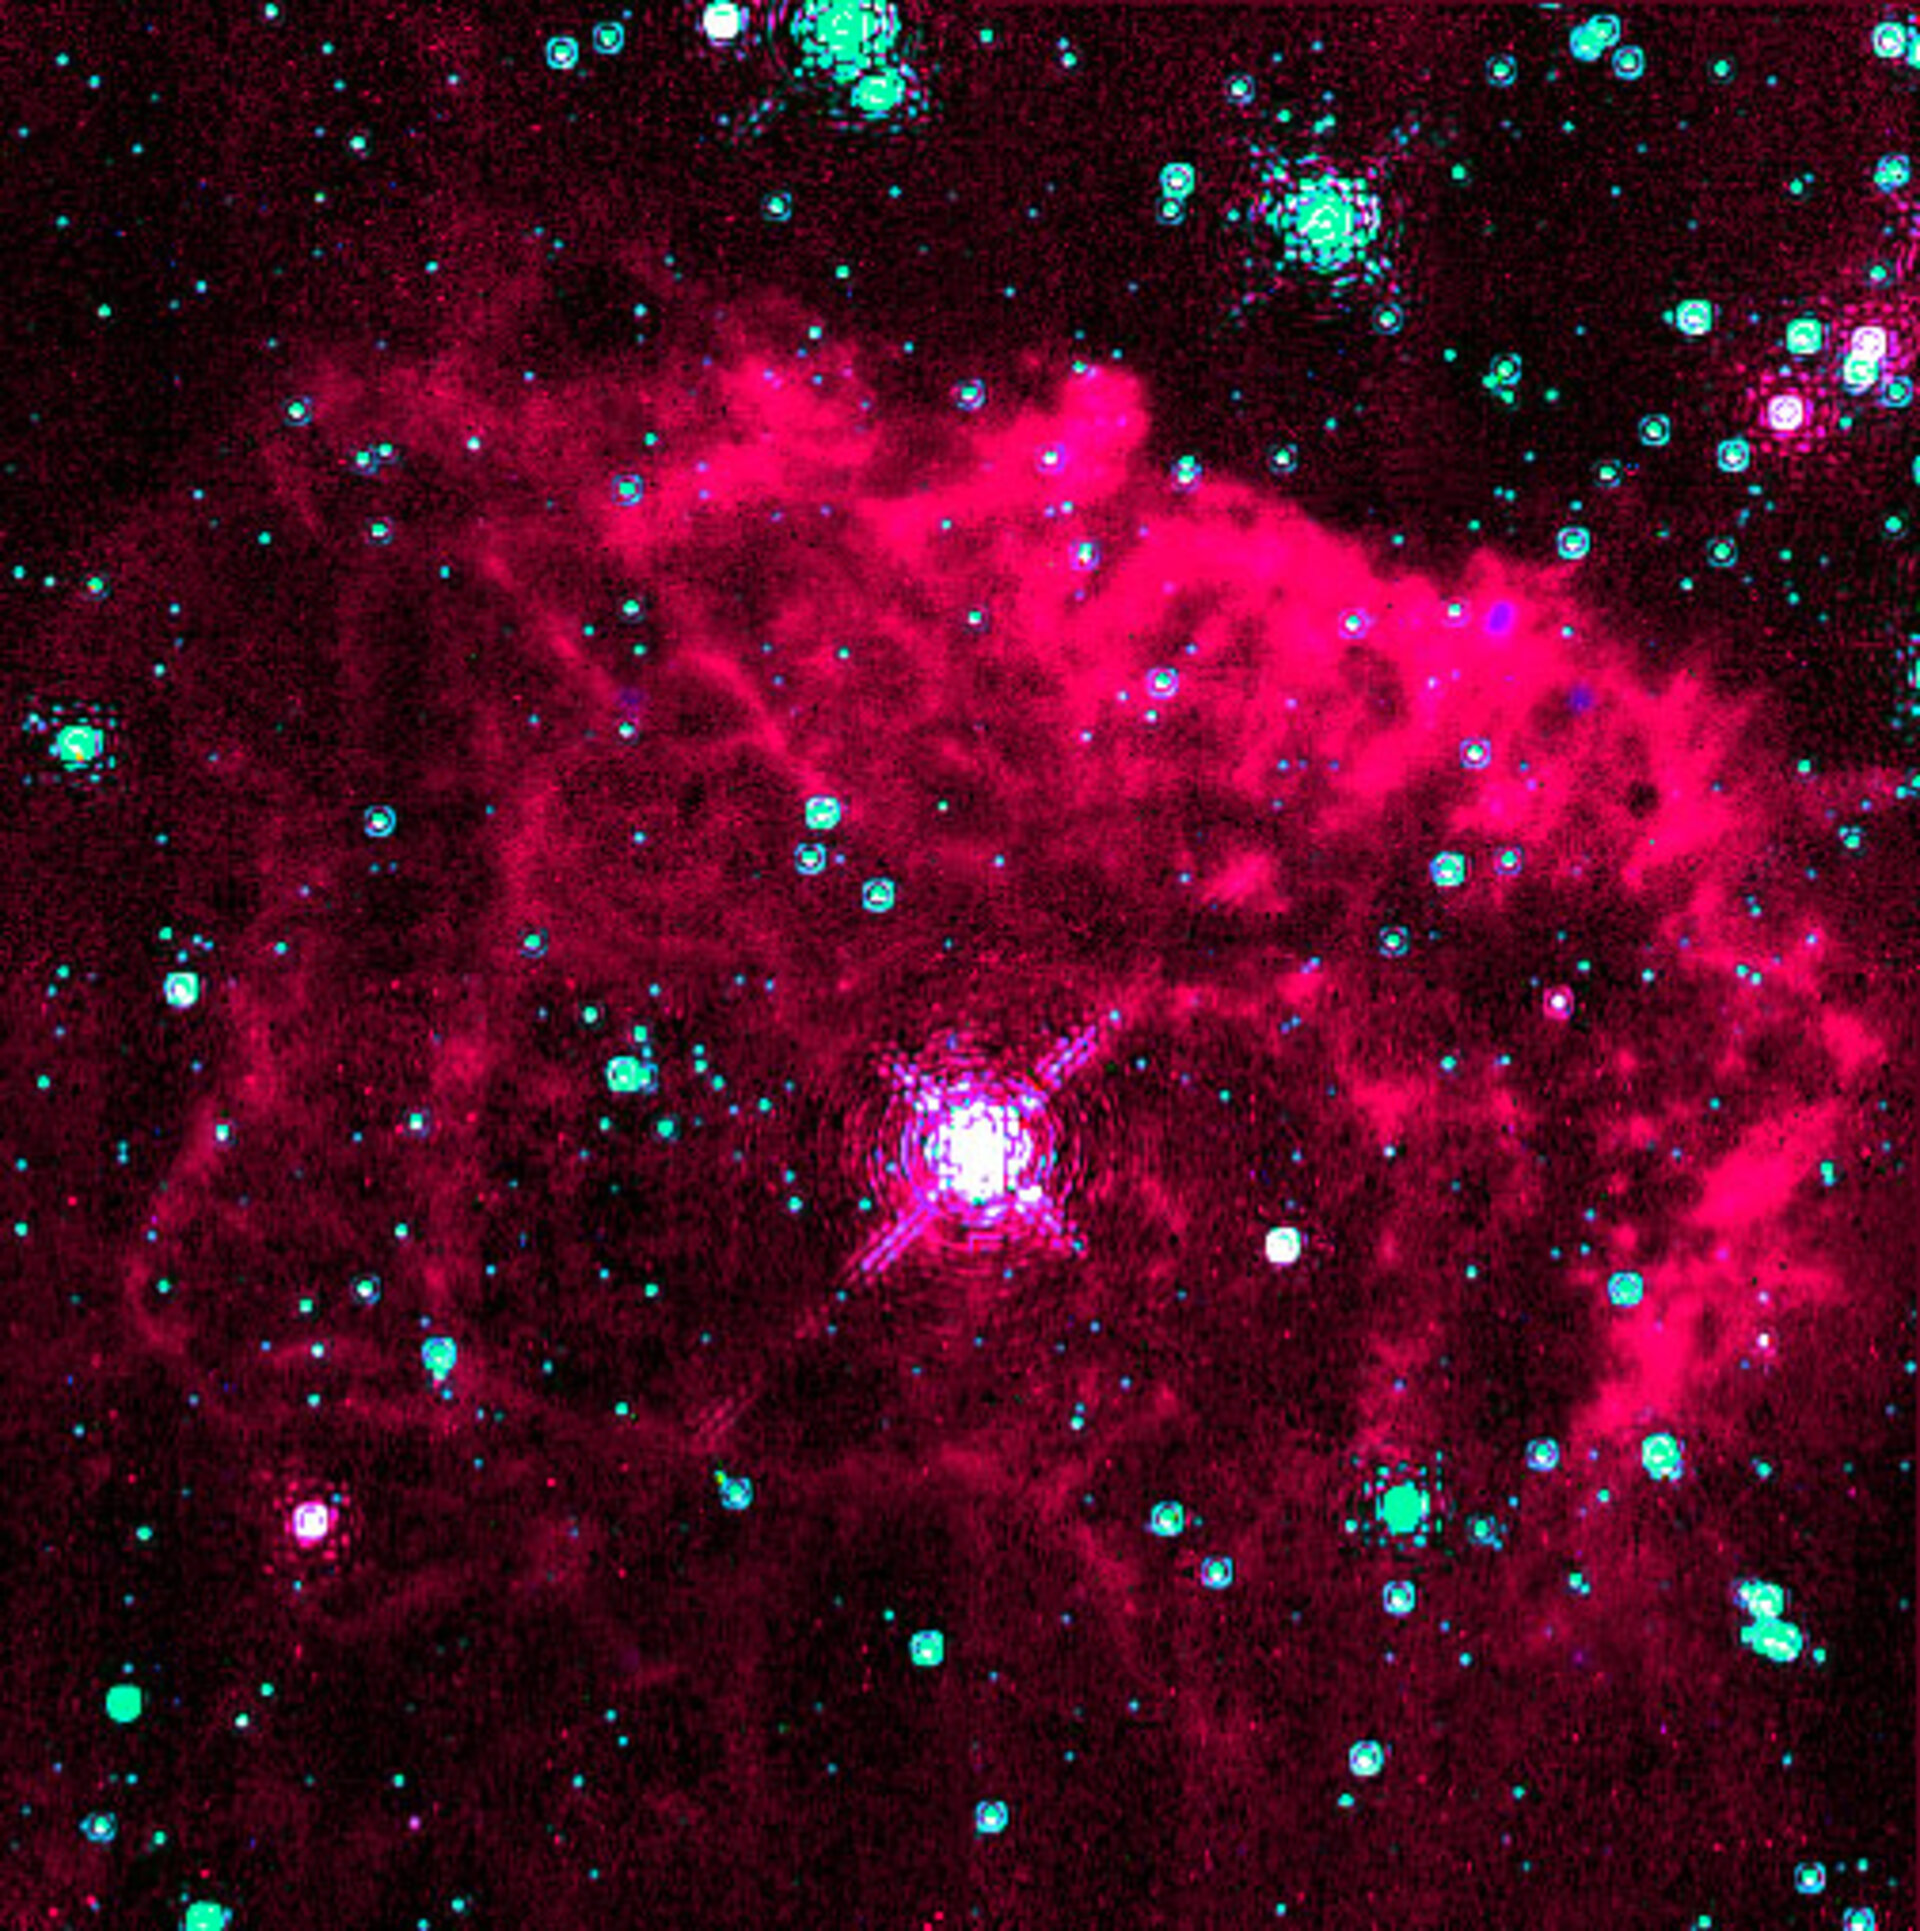 Pistol star, one of the Galaxy's brightest stars in Milky Way's core